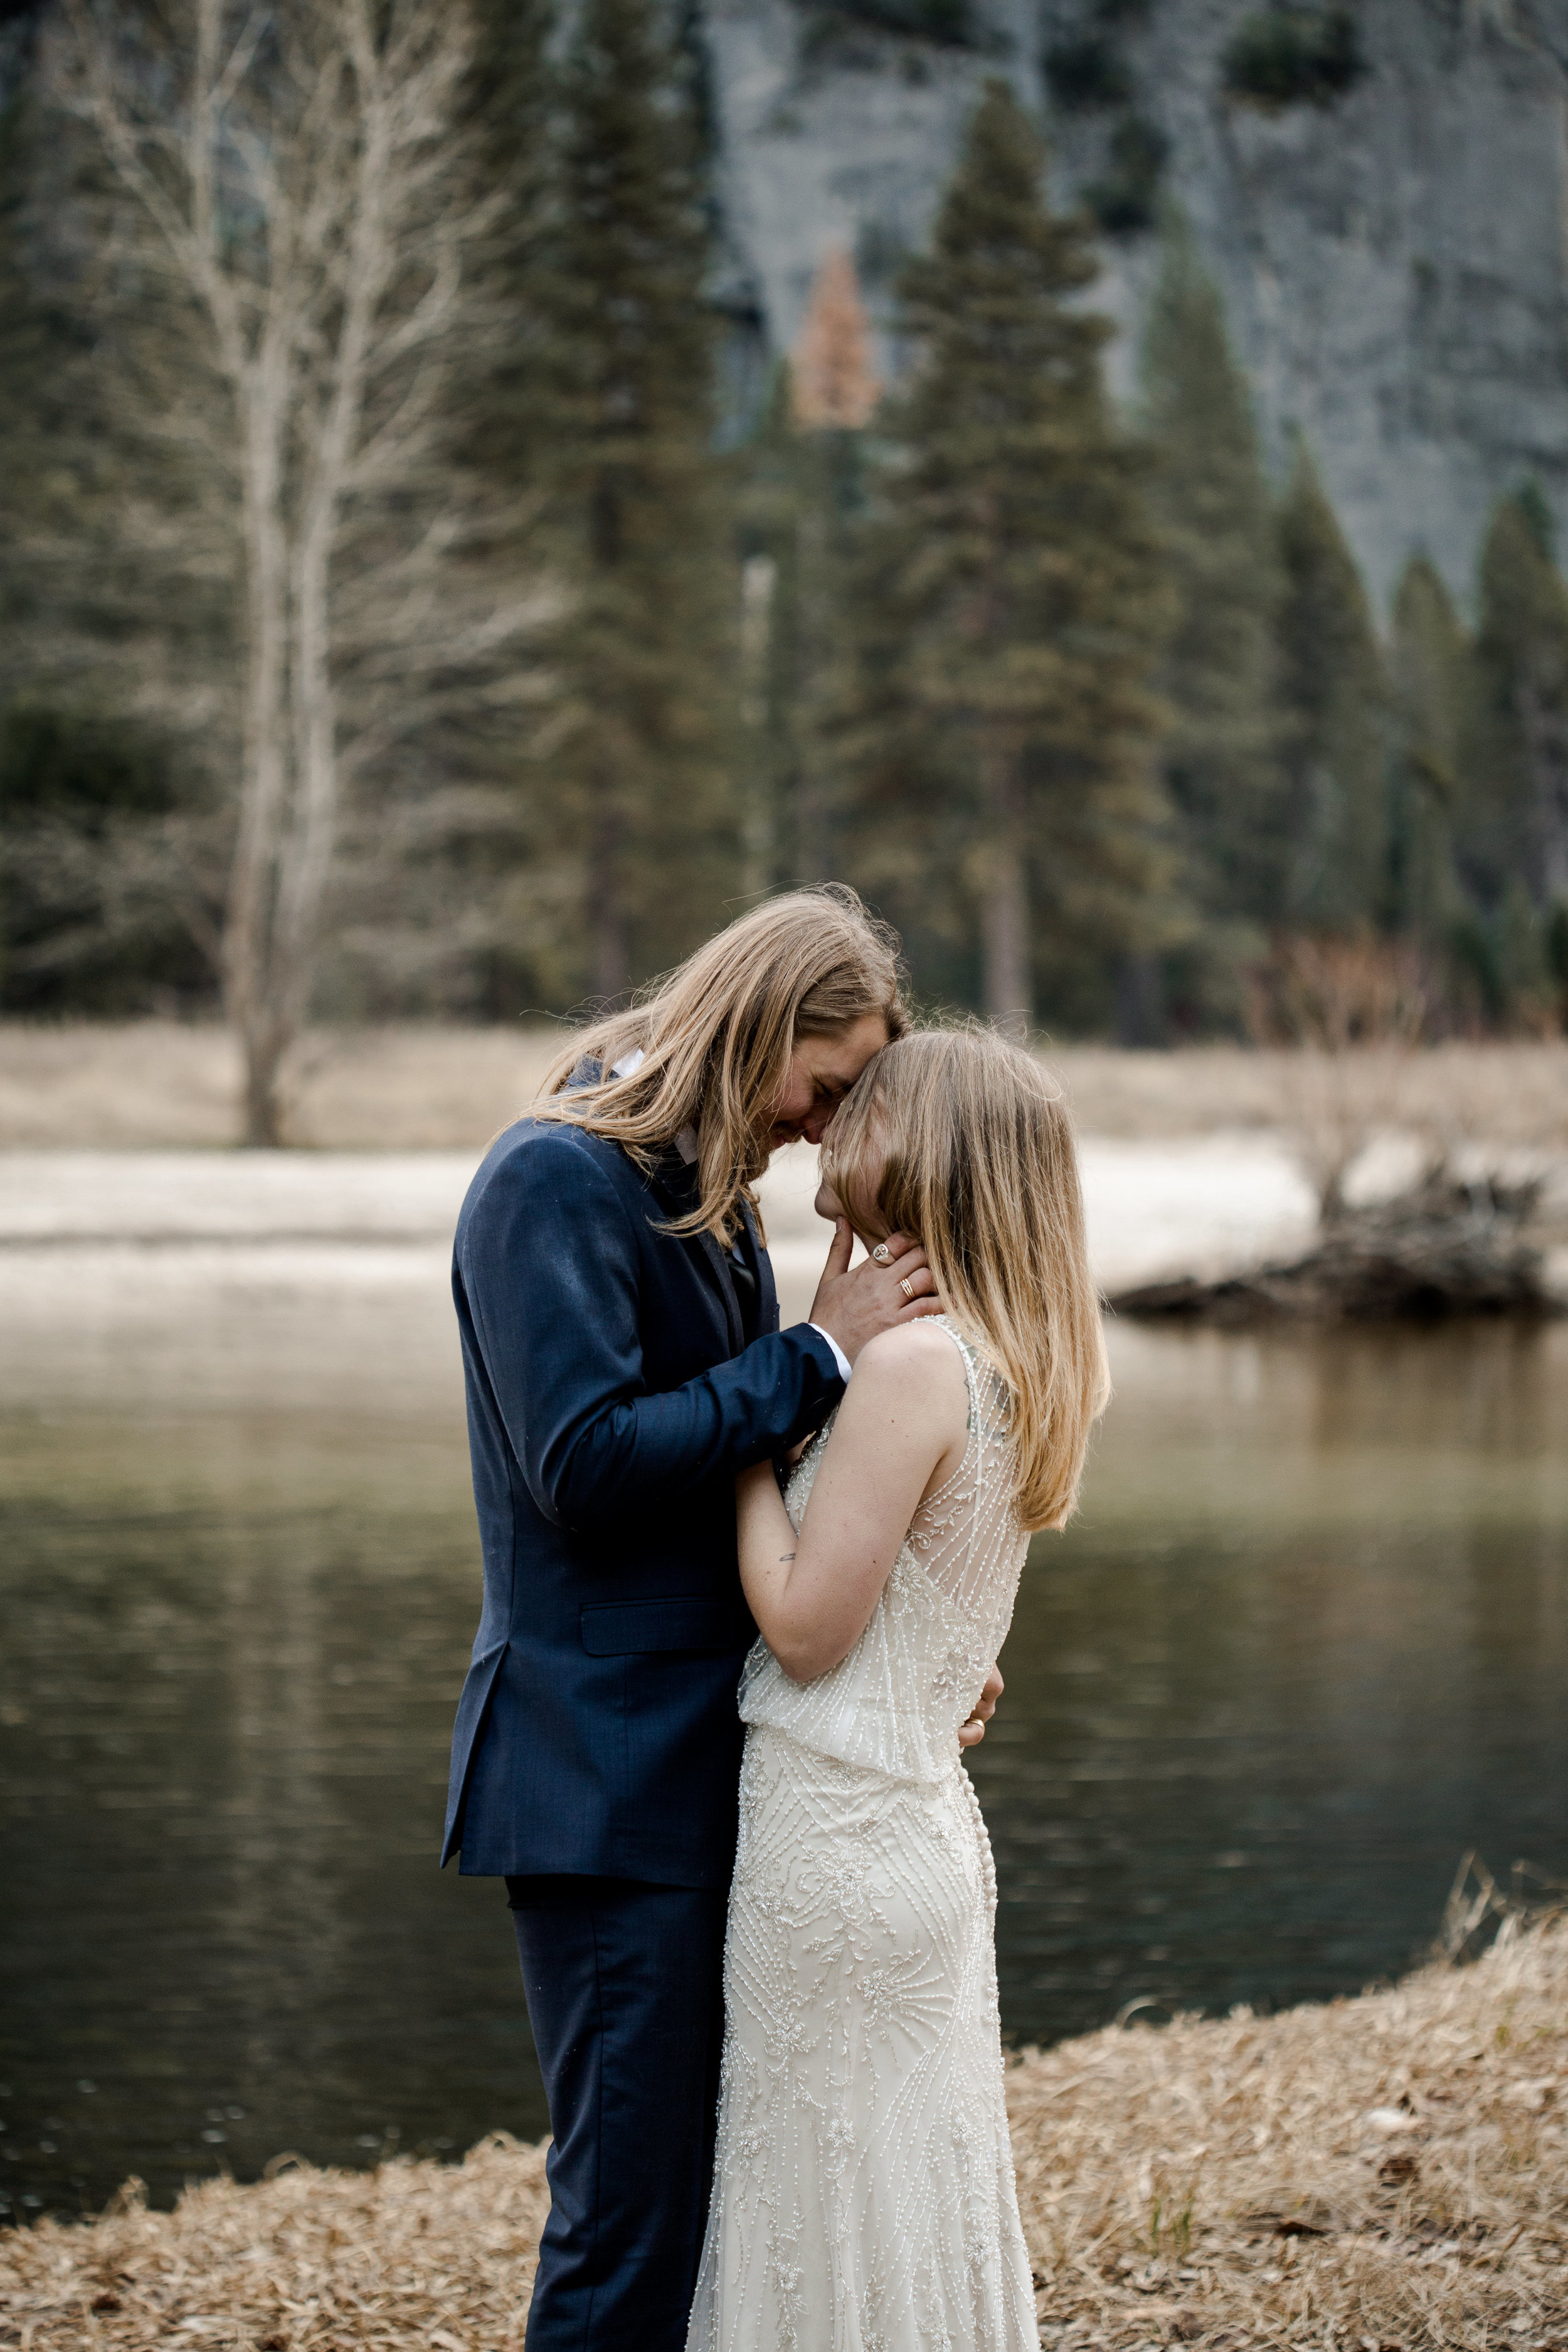 nicole-daacke-photography-yousemite-national-park-elopement-photographer-winter-cloud-moody-elope-inspiration-yosemite-valley-tunnel-view-winter-cloud-fog-weather-wedding-photos-33.jpg